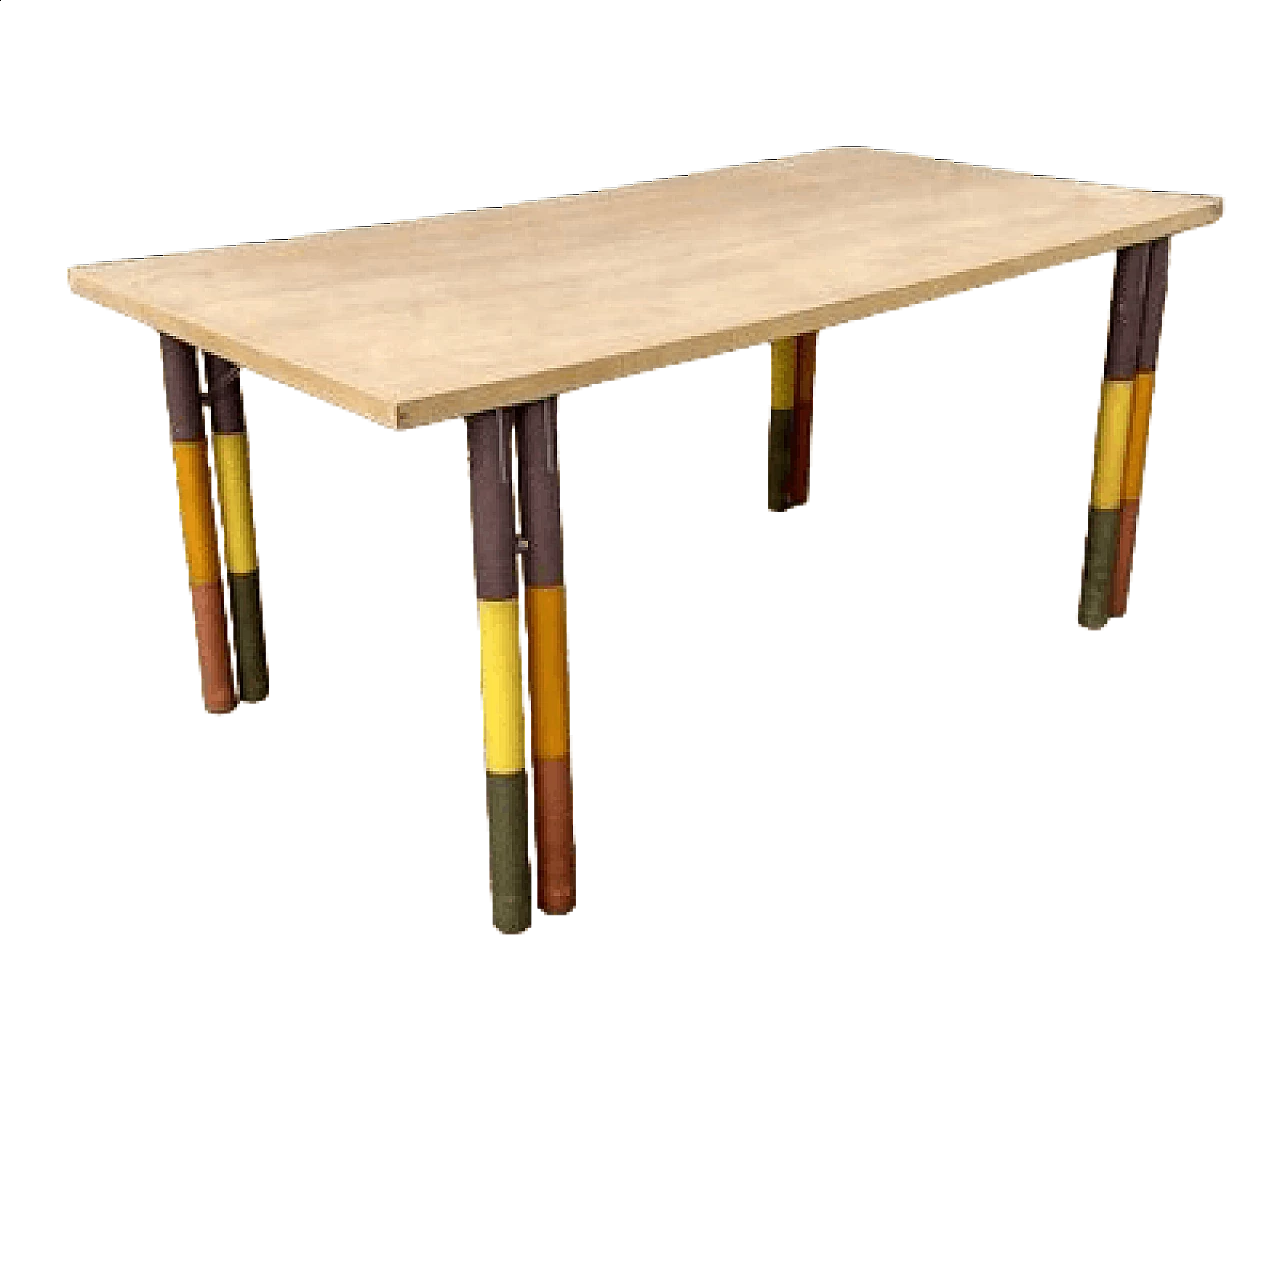 Karan d'Ache dining table by Antonio Citterio and P. Nava for Malobbia, 1980s 10